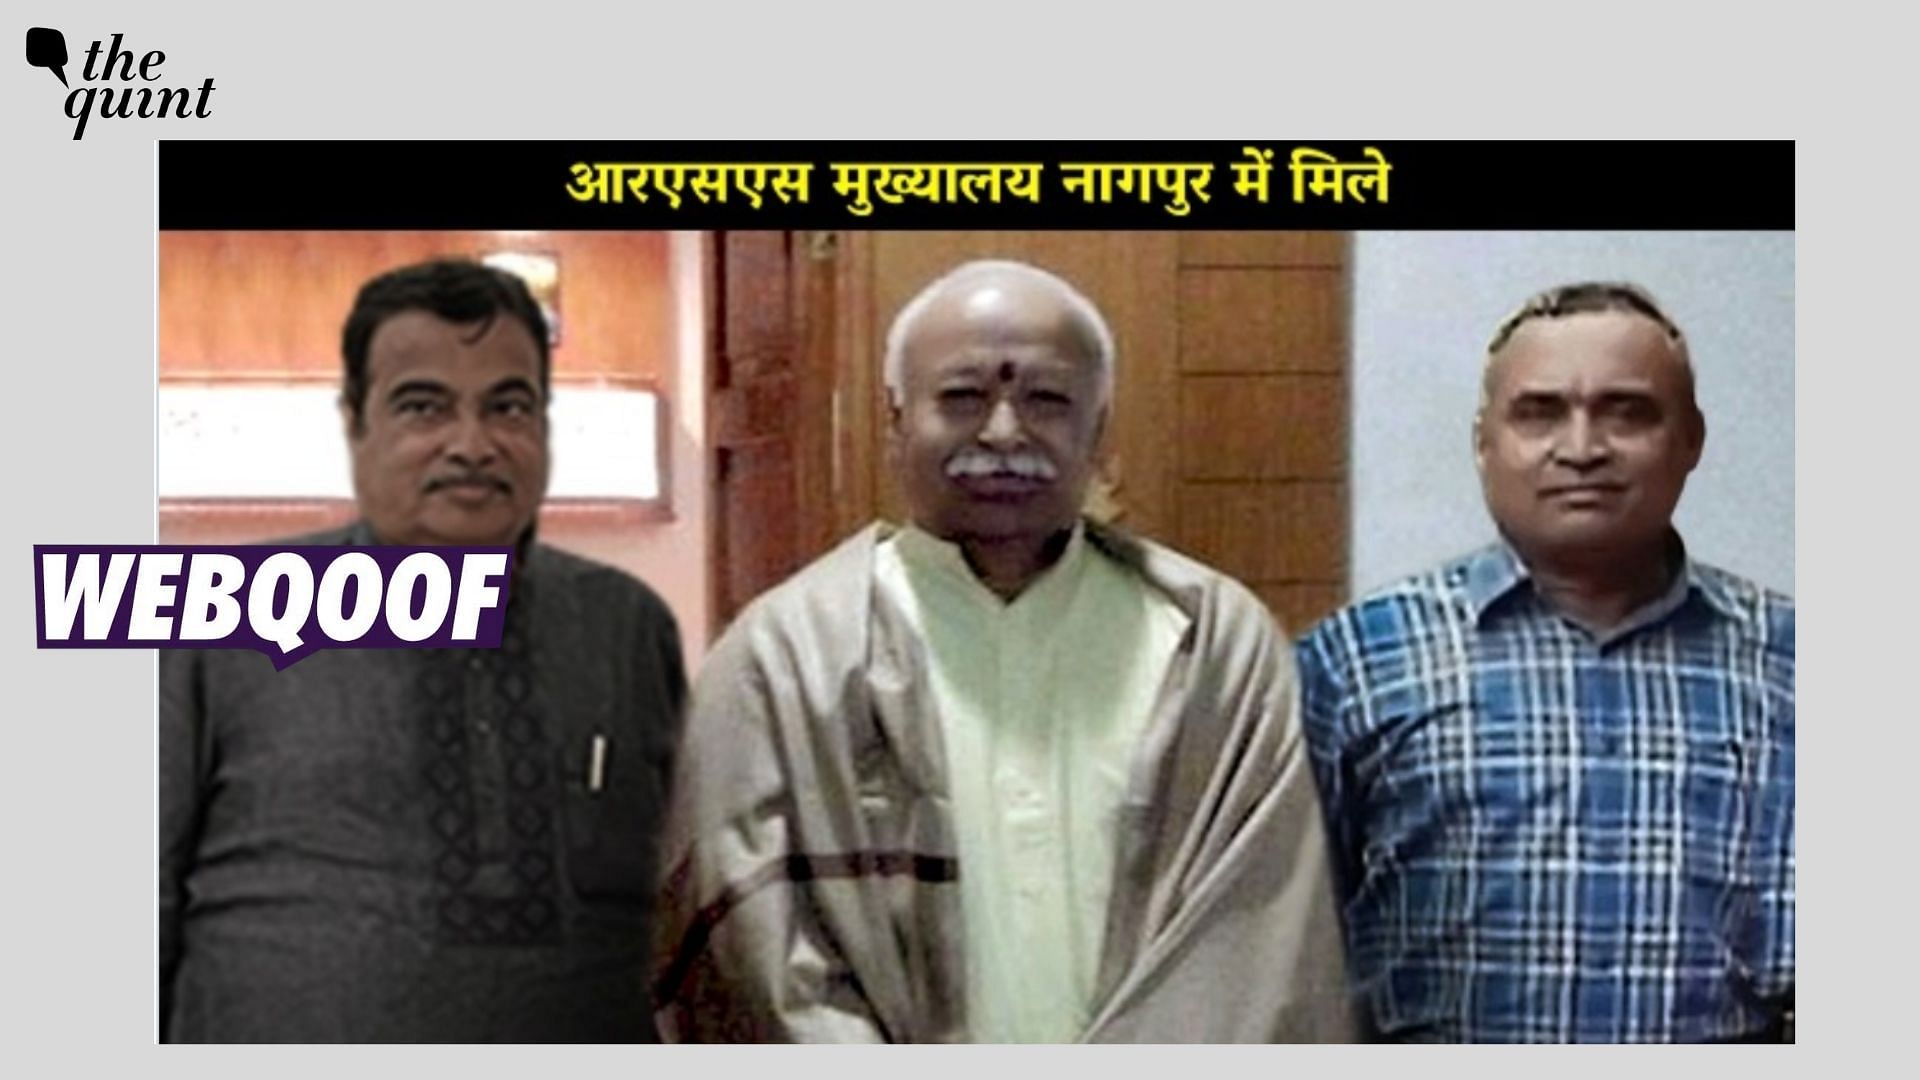 <div class="paragraphs"><p>The claim states that RSS' Mohan Bhagwat, Union Minister Nitin Gadkari and Army chief Manoj Pande had met in Nagpur.</p></div>